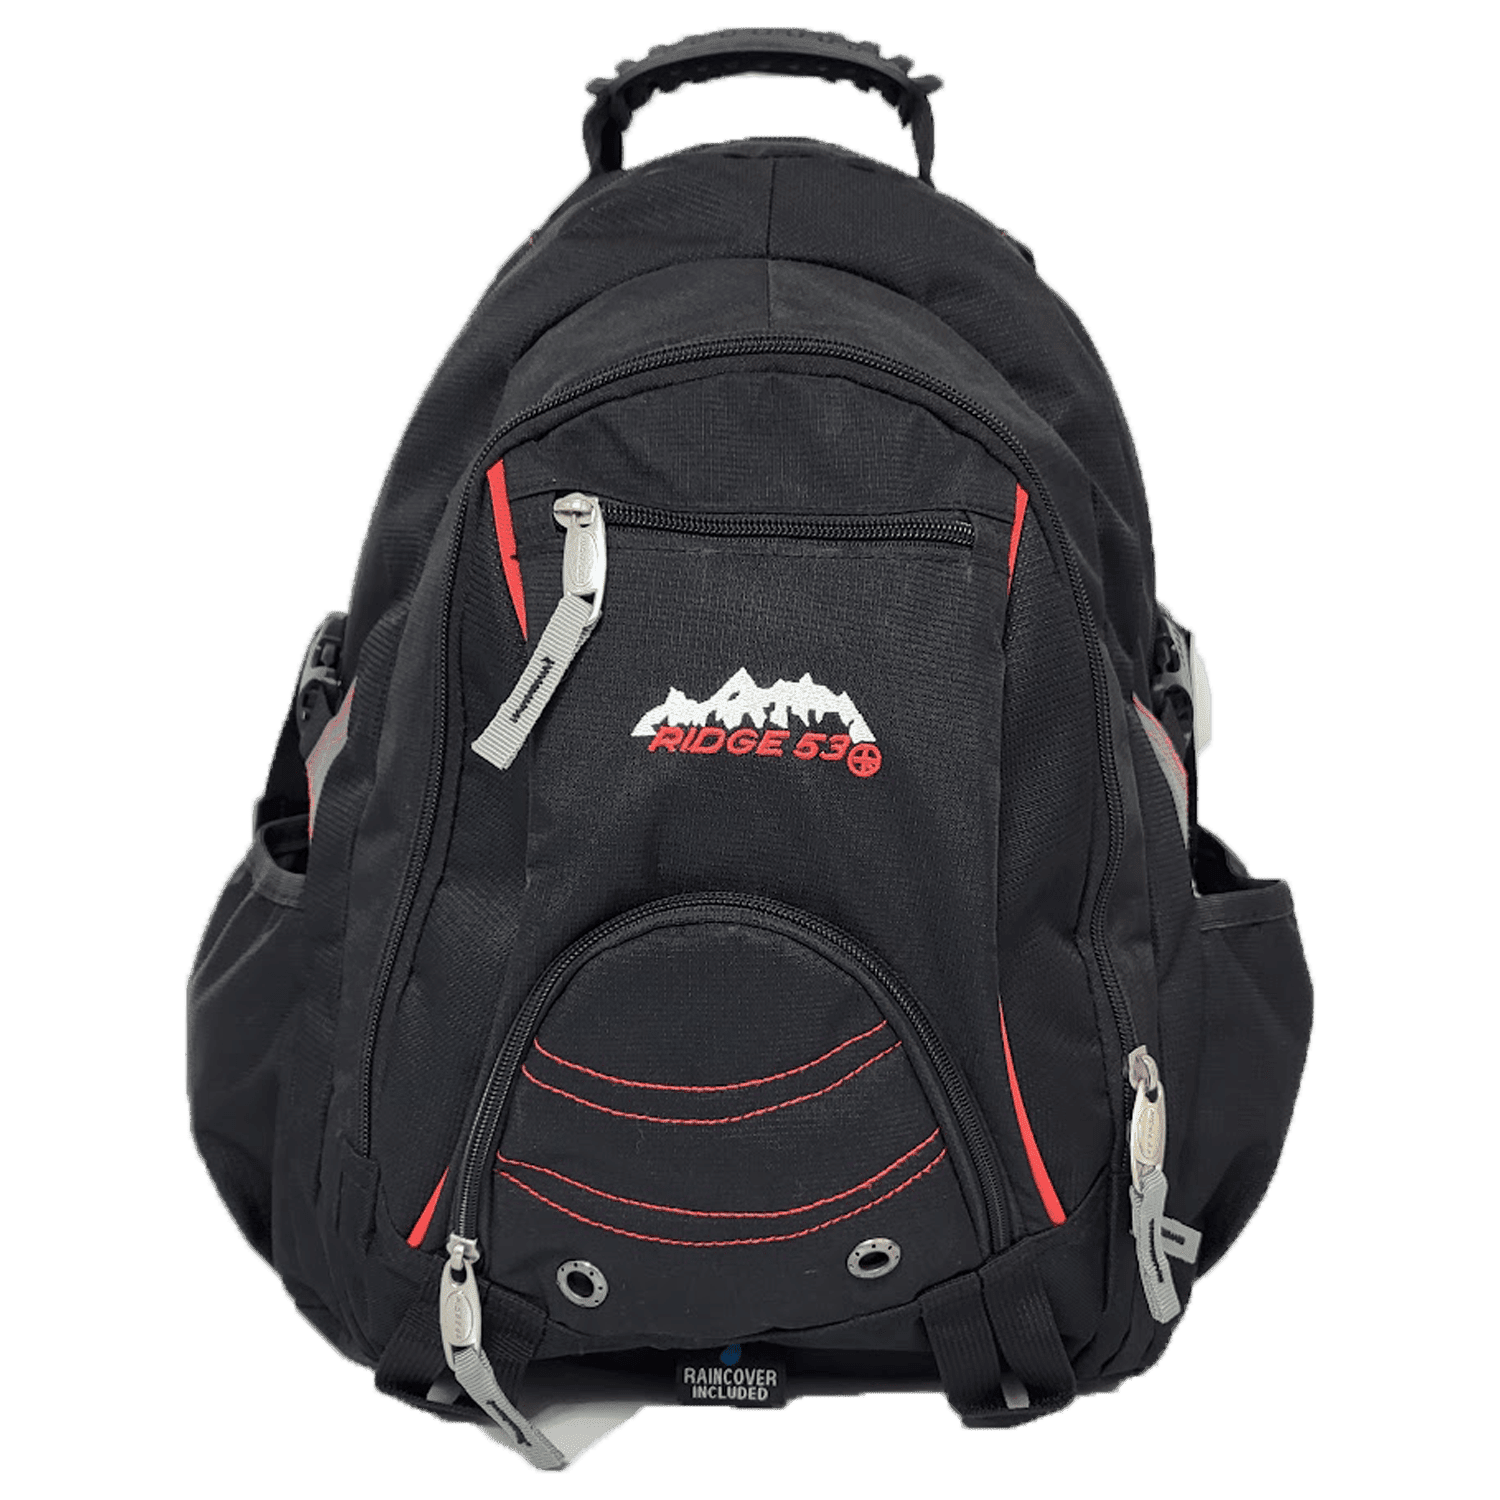 Sportech Ridge 53 – Bolton Backpack - Black/Red 1 Shaws Department Stores